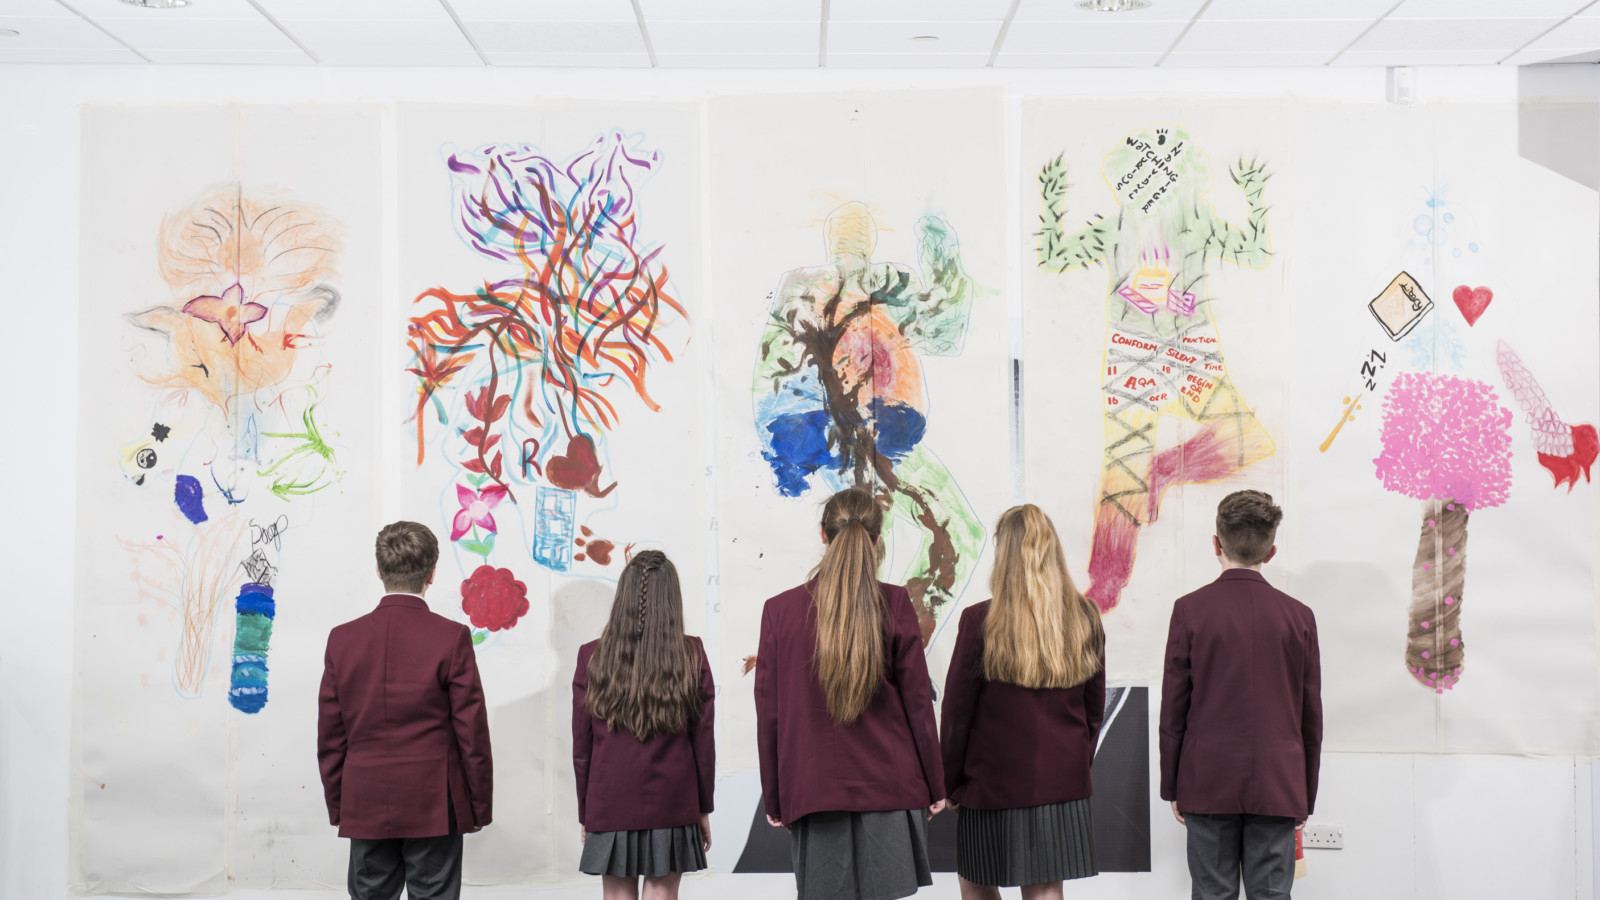 A group of young people stand facing a collection of brightly coloured artworks. The young people are all wearing maroon blazes, some of have long hair and some have short, cropped hair.